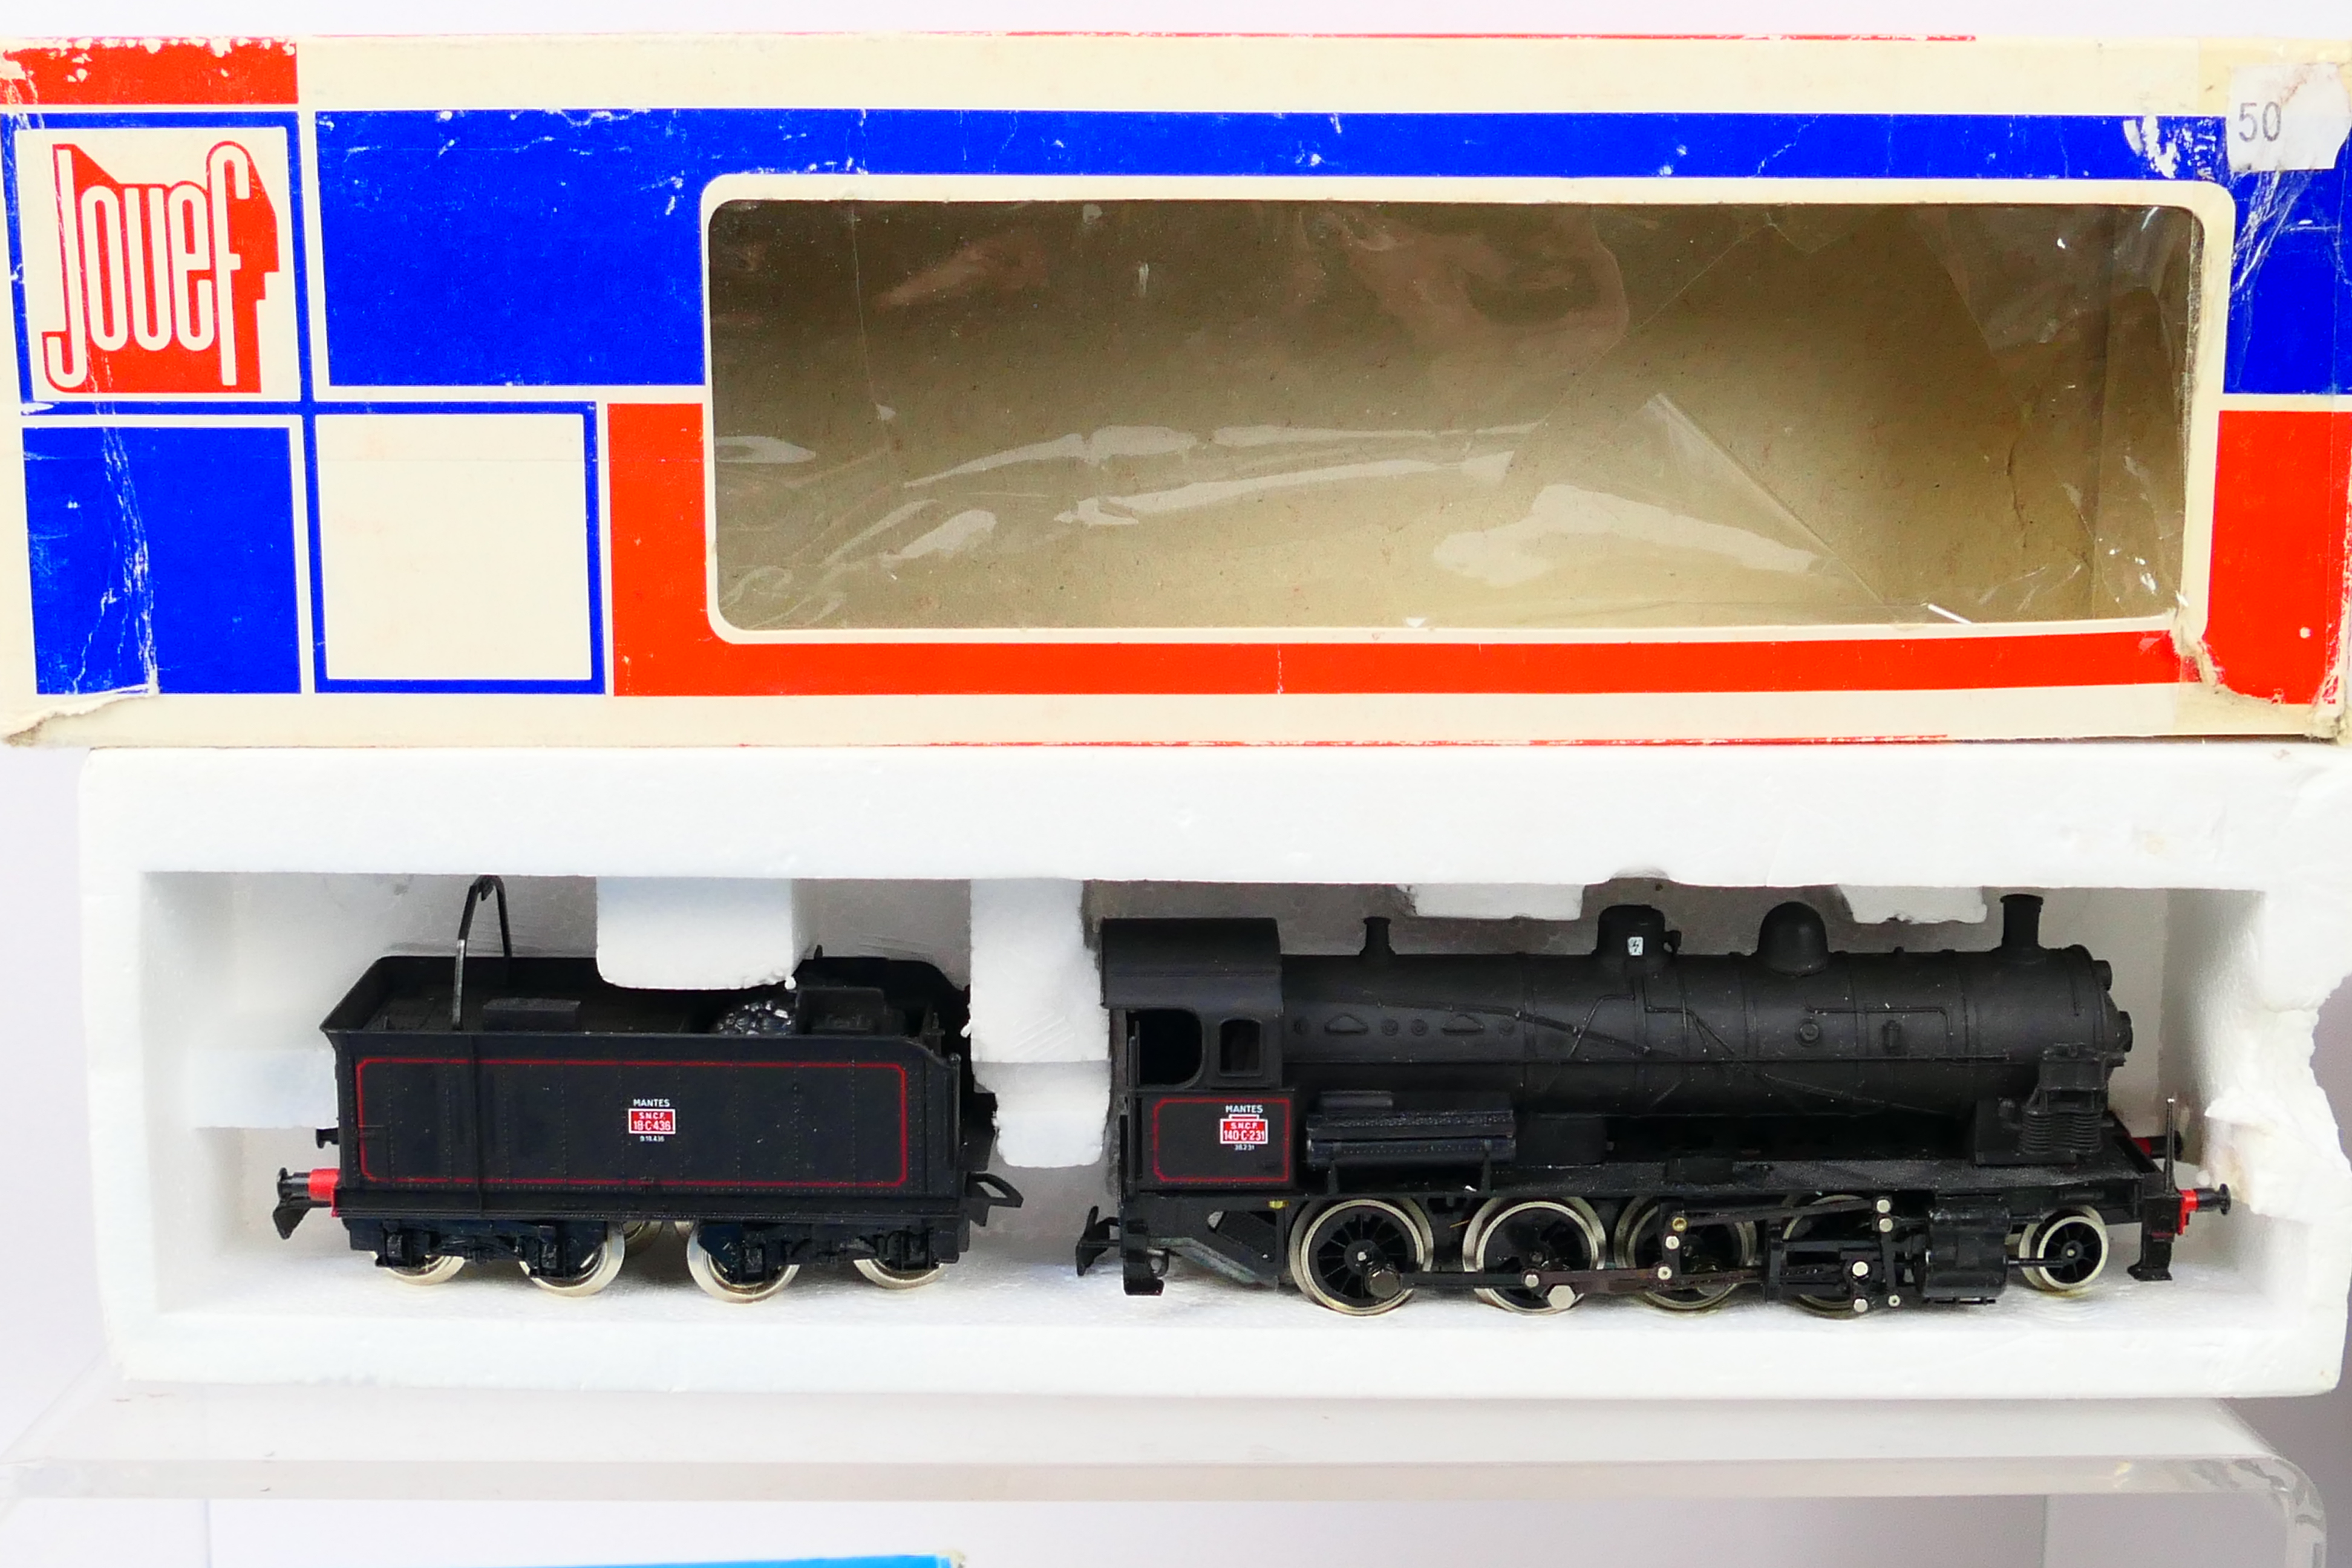 Airfix - Jouef - Model Railways - A pair of OO gauge locomotives including 0-4-2 GWR 1466 in GWR - Image 2 of 6